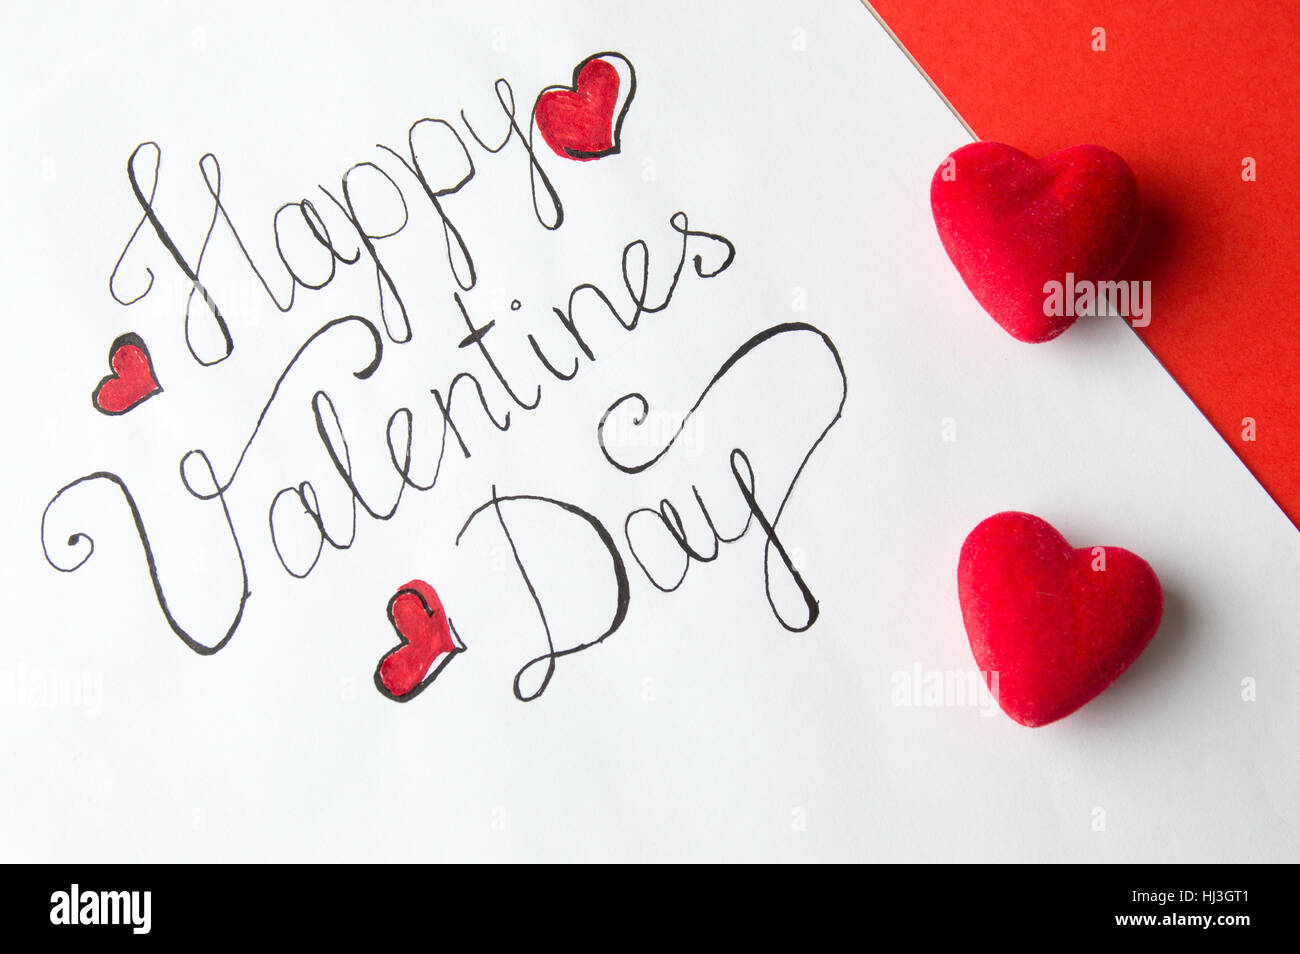 Happy valentines day card calligraphie manuscrite Banque D'Images